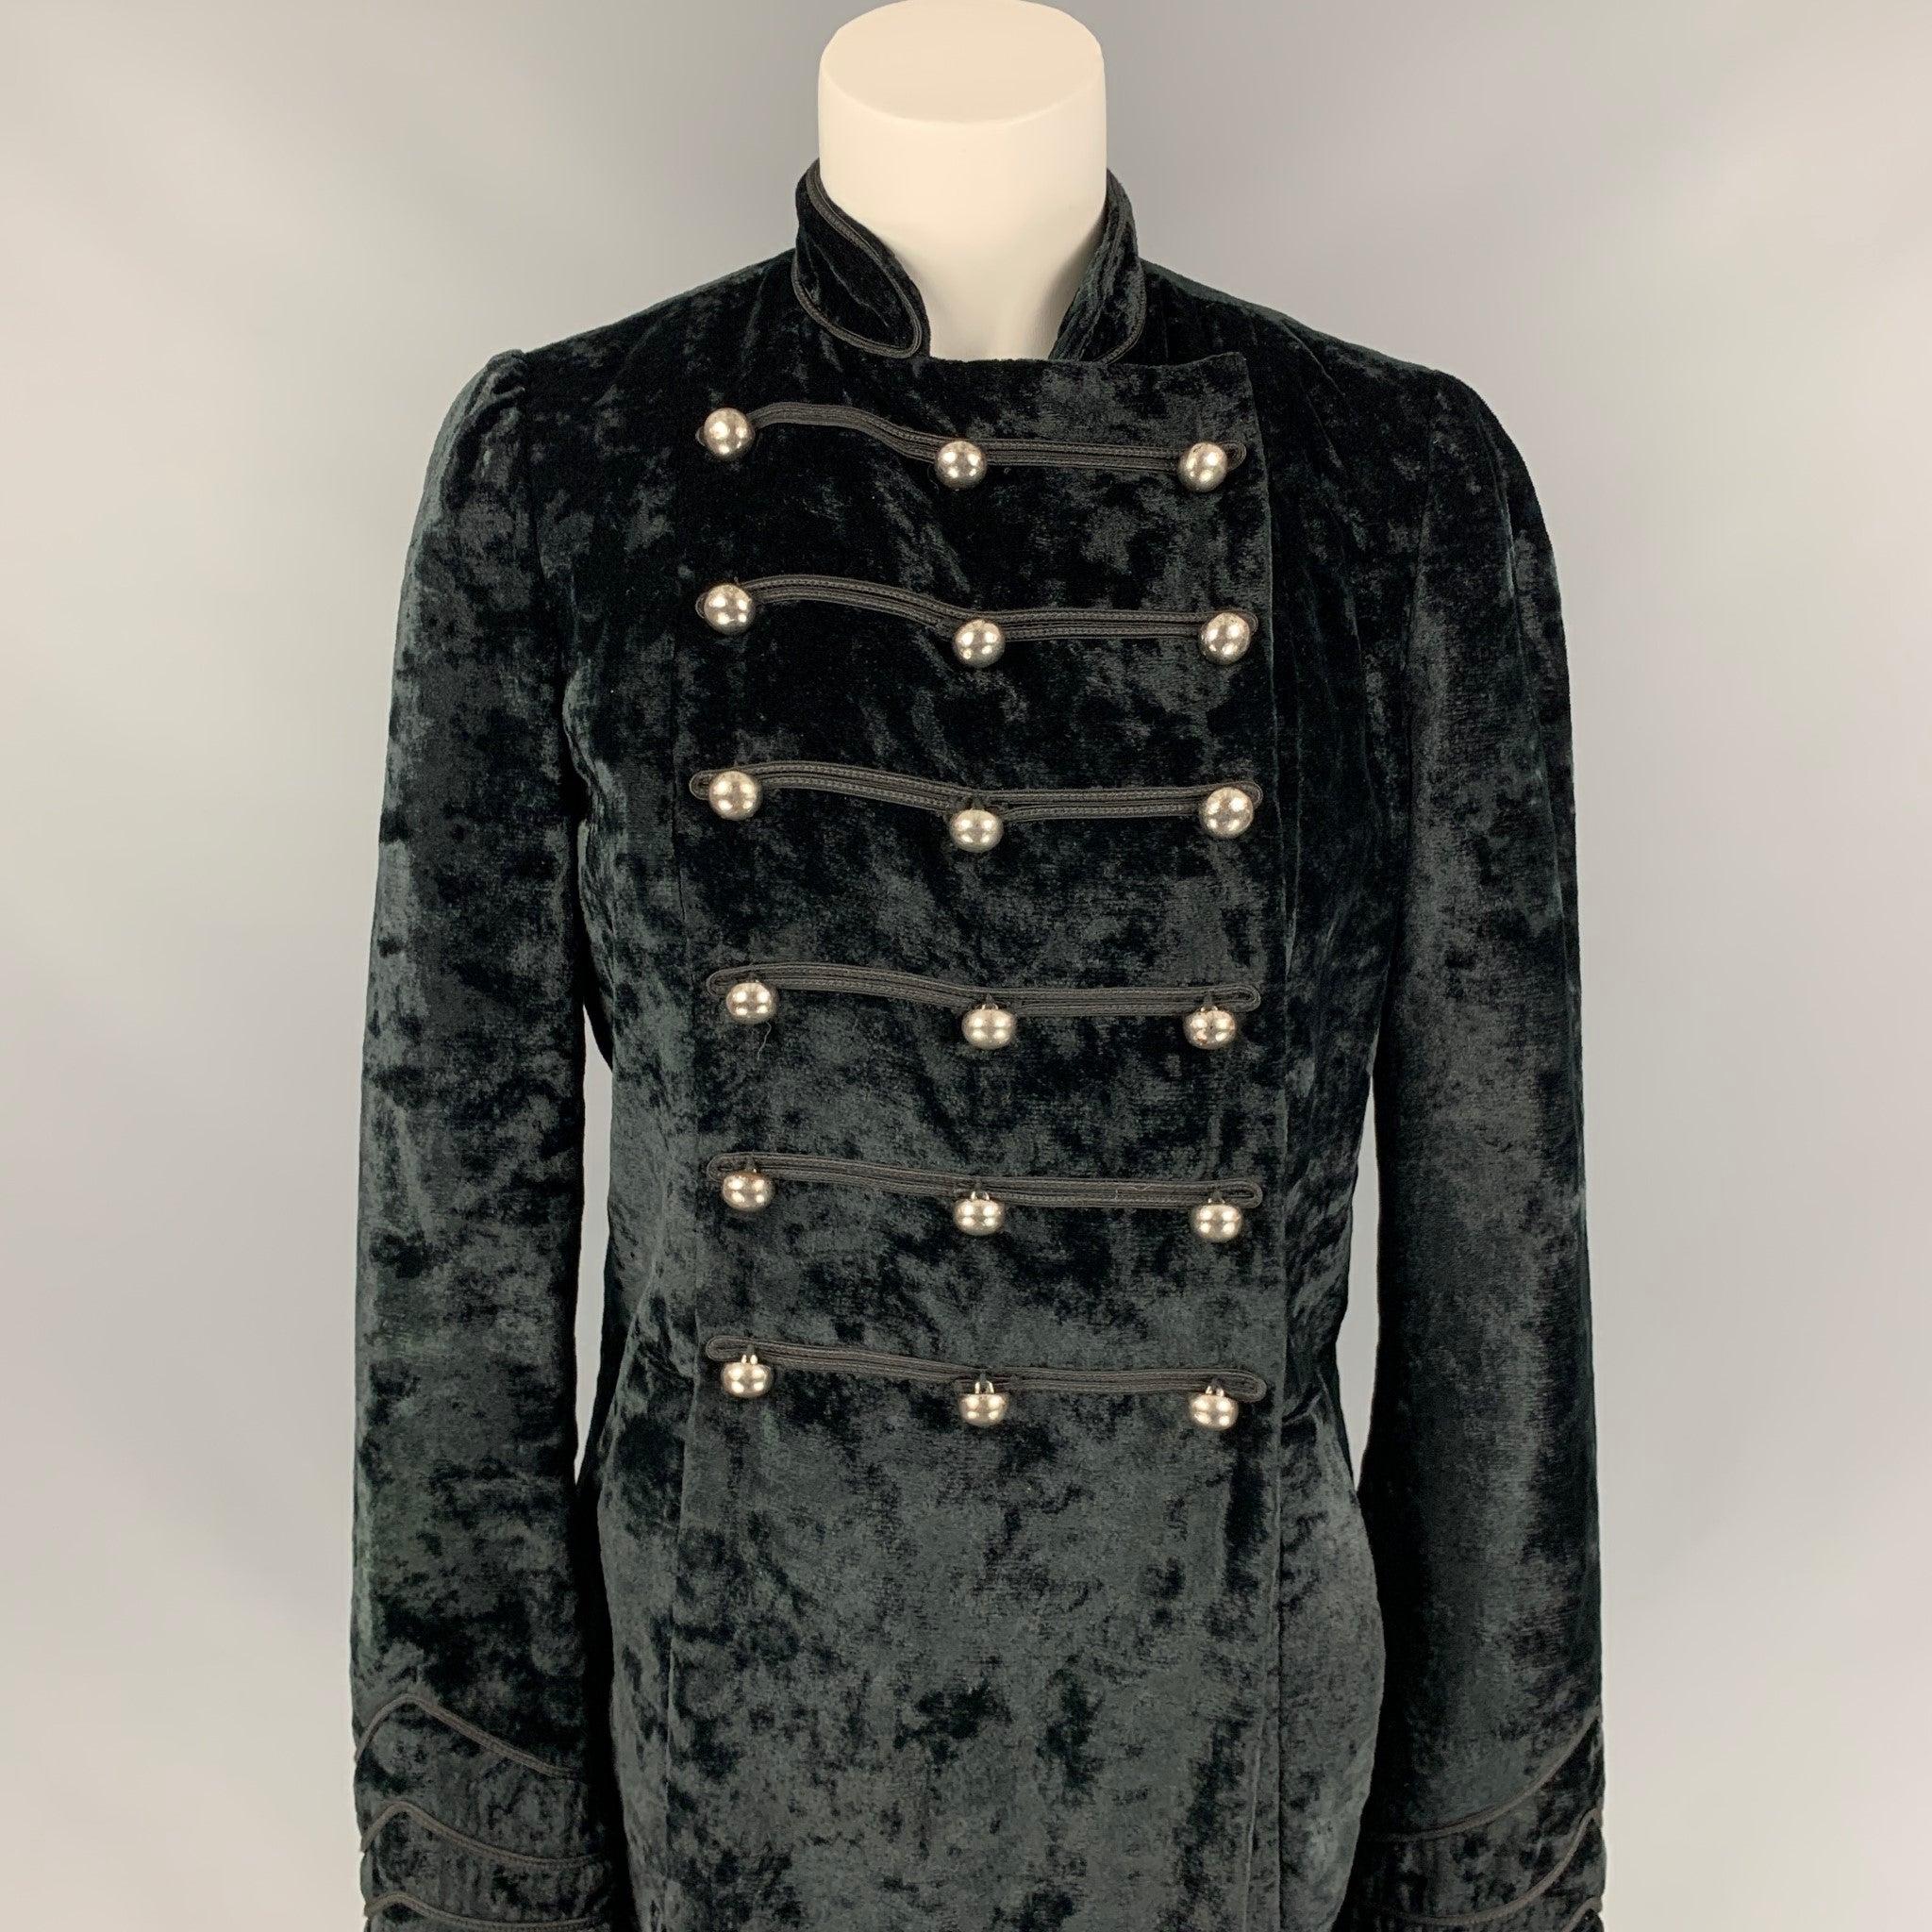 MARC by MARC JACOBS coat comes in a black velvet rayon / polyester featuring a stand up collar, back strap, silver tone metal buttons, slit pockets, and a double breasted closure.
Very Good
Pre-Owned Condition. 

Marked:  M 

Measurements: 
